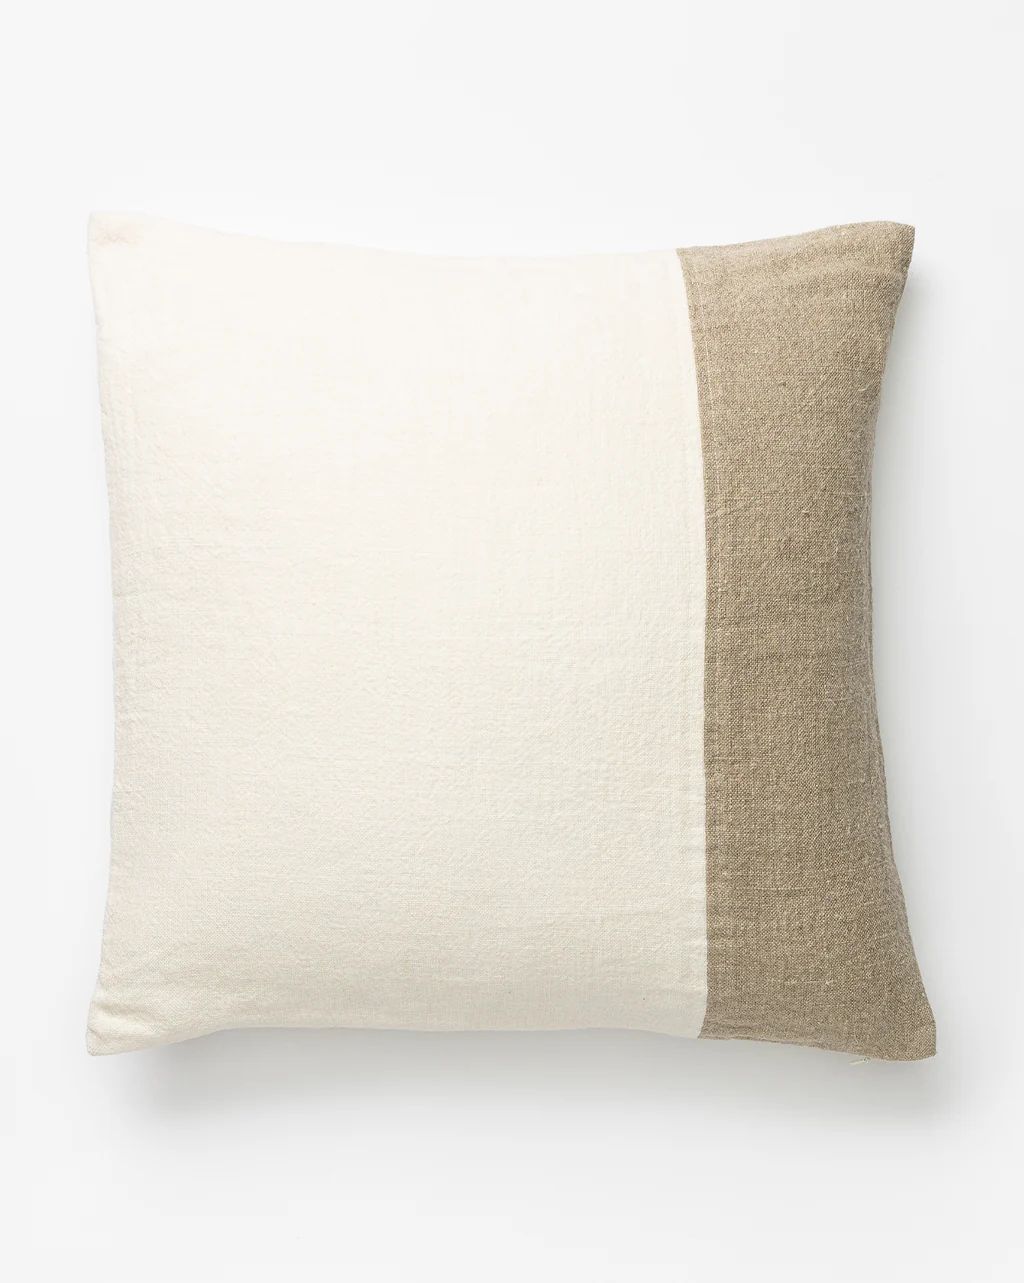 Gina Patched Linen Pillow Cover | McGee & Co.